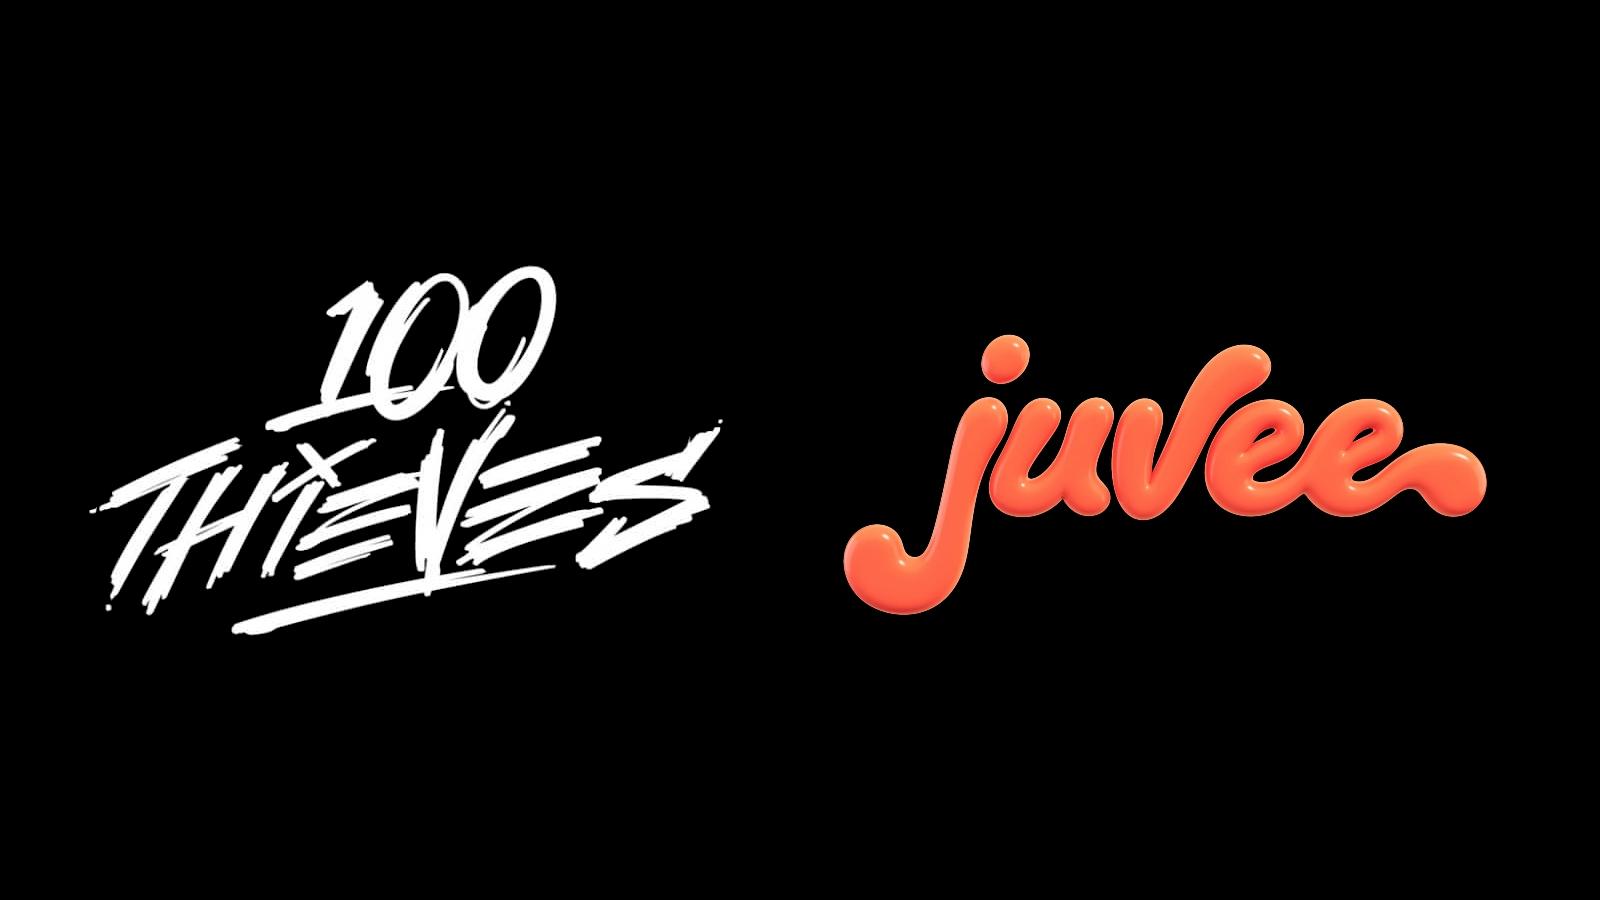 100 Thieves and Juvee logos on black background